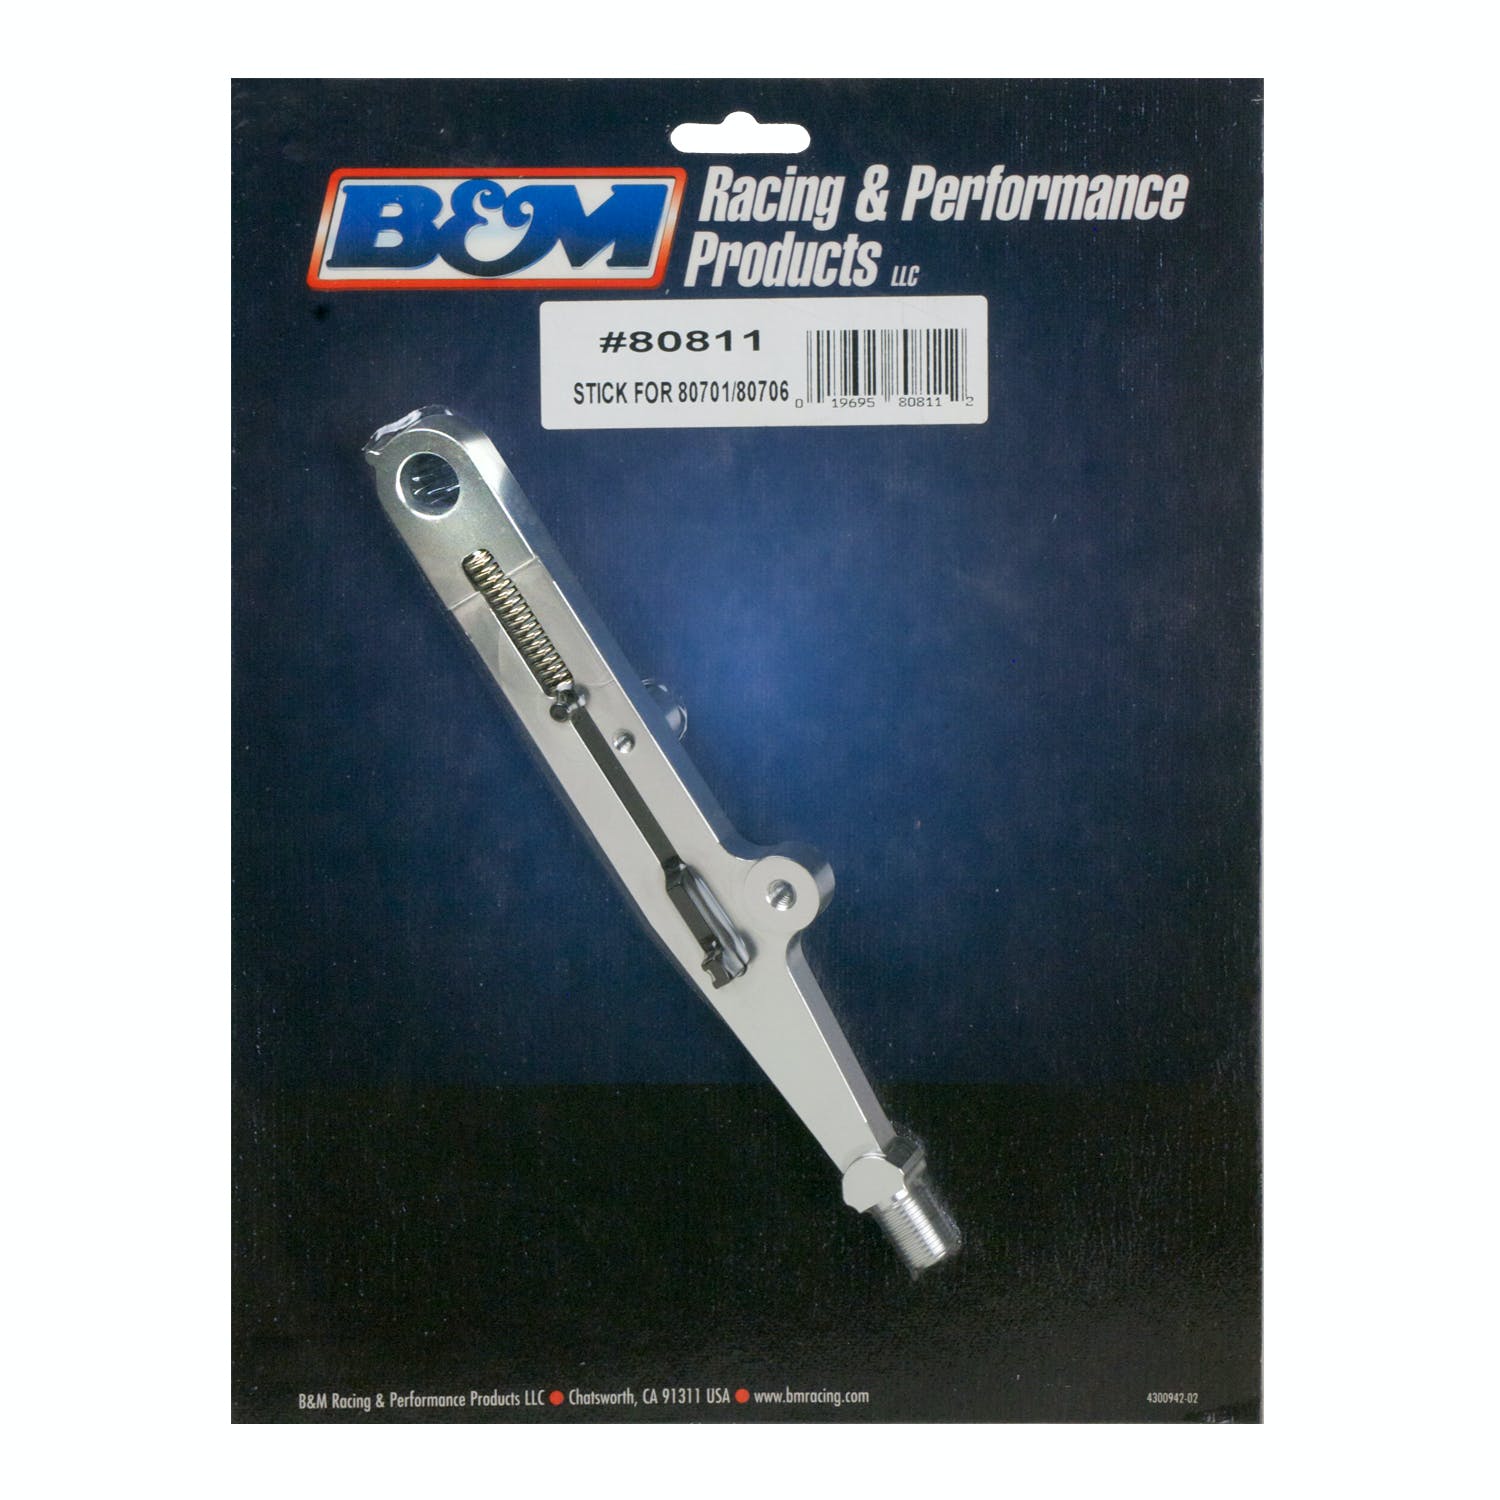 B&M 80811 STICK FOR 80701/80706